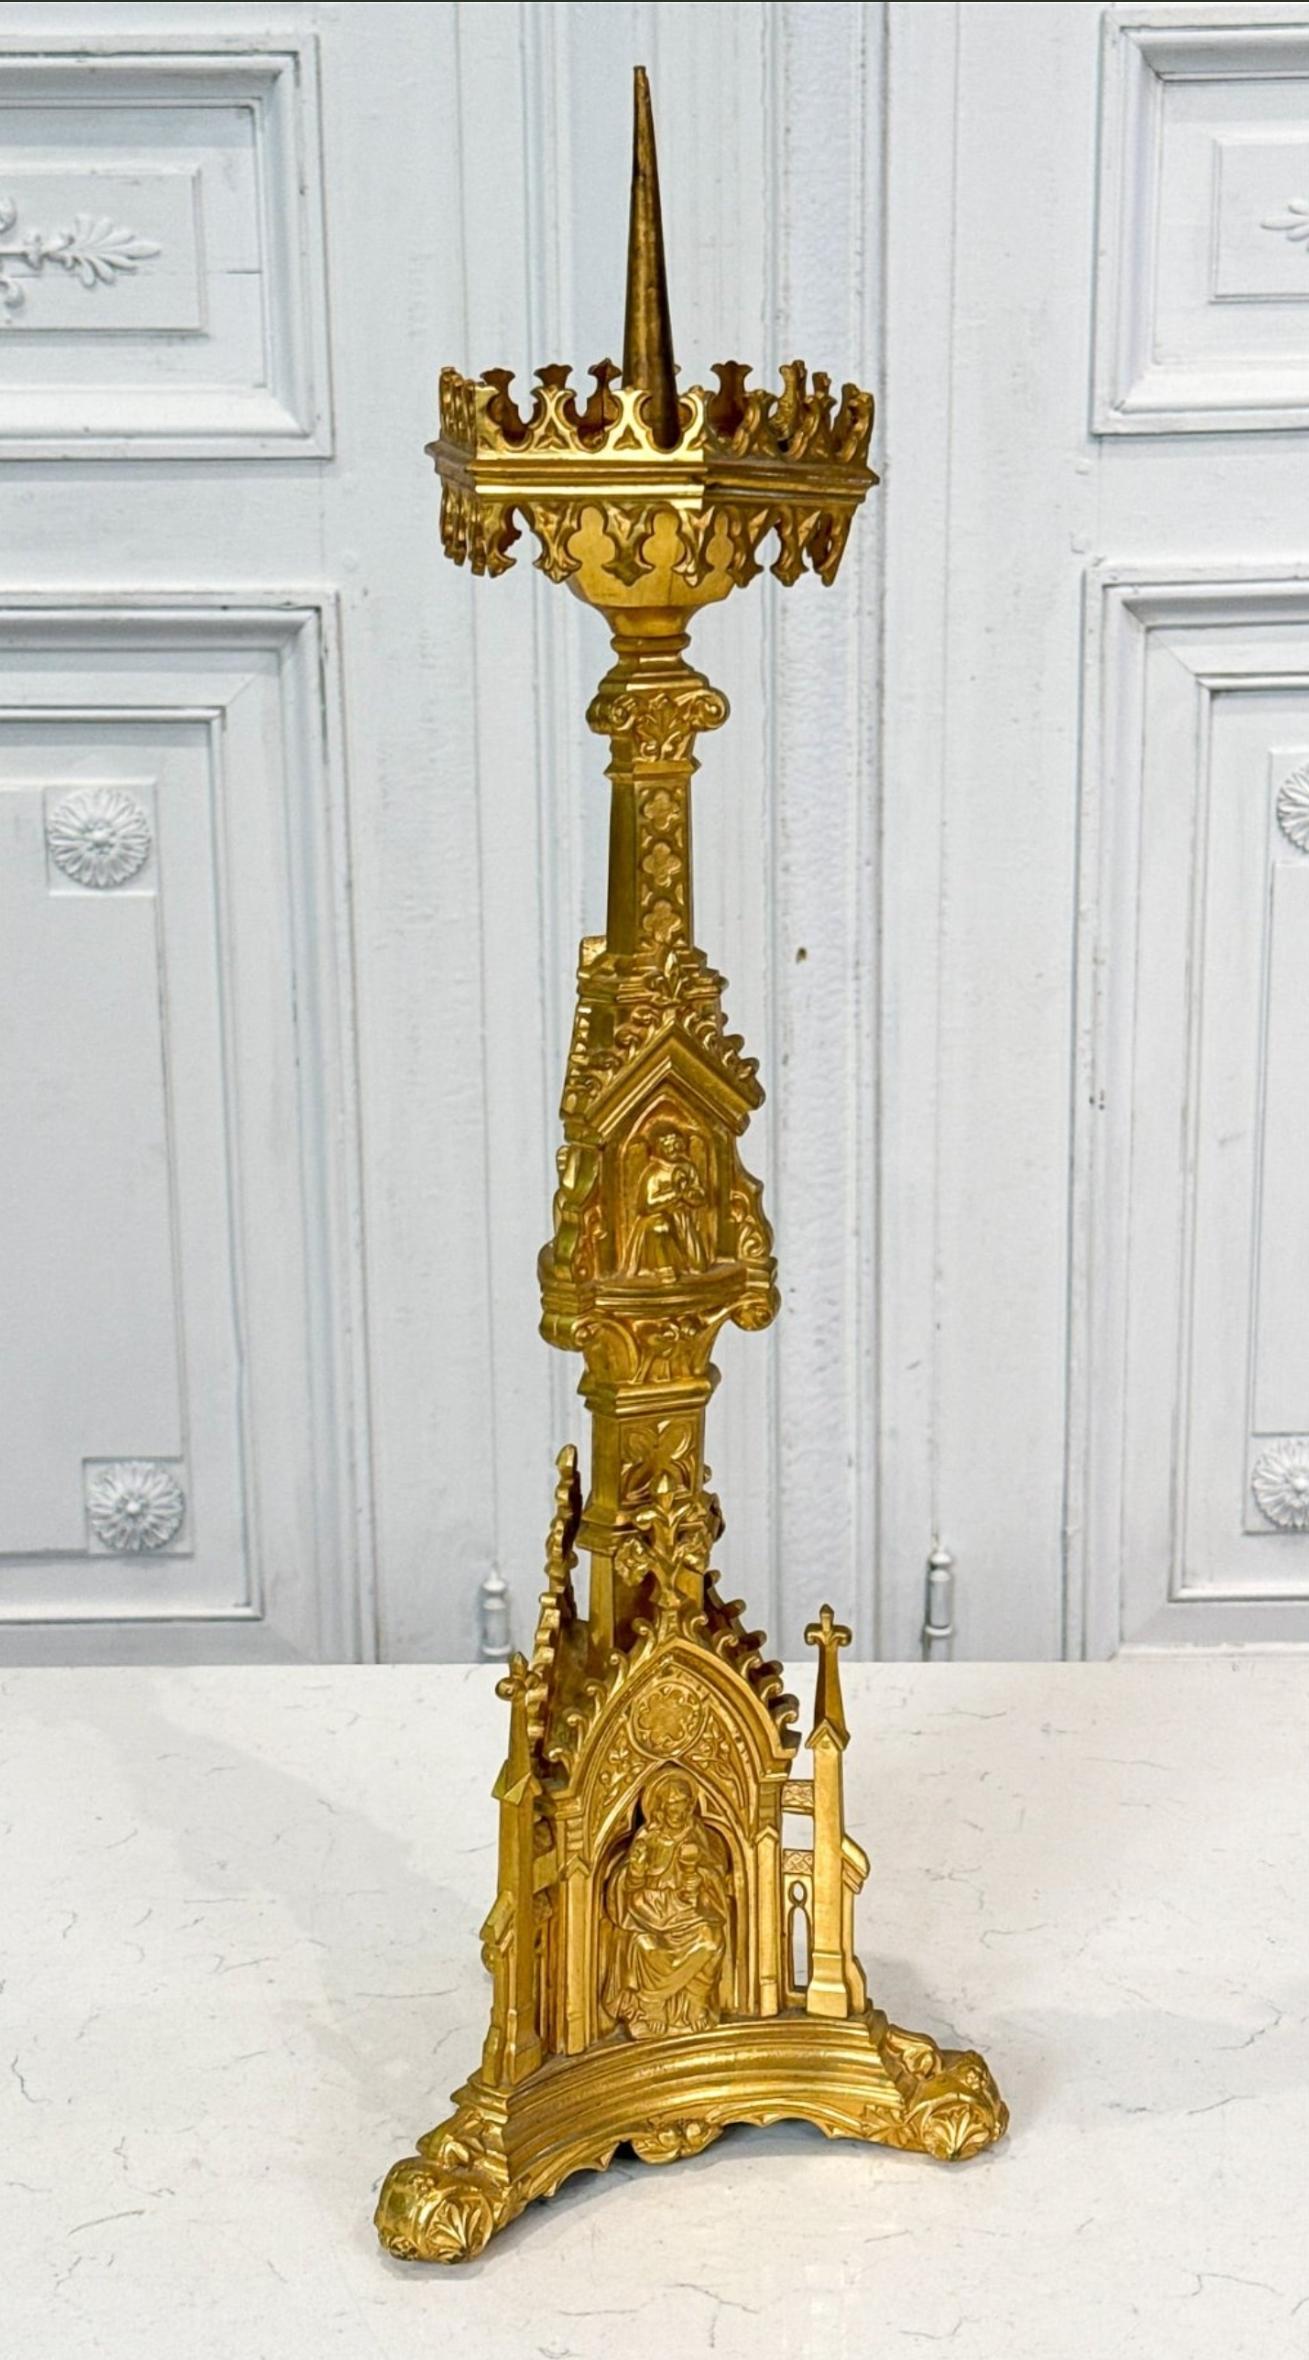 A stunning Late Victorian Neo-Gothic gilt bronze altar stick pricket candlestick. Late 19th to early 20th century, the Continental European antique features an exceptionally executed sculptural form, intricately detailed throughout, with religious